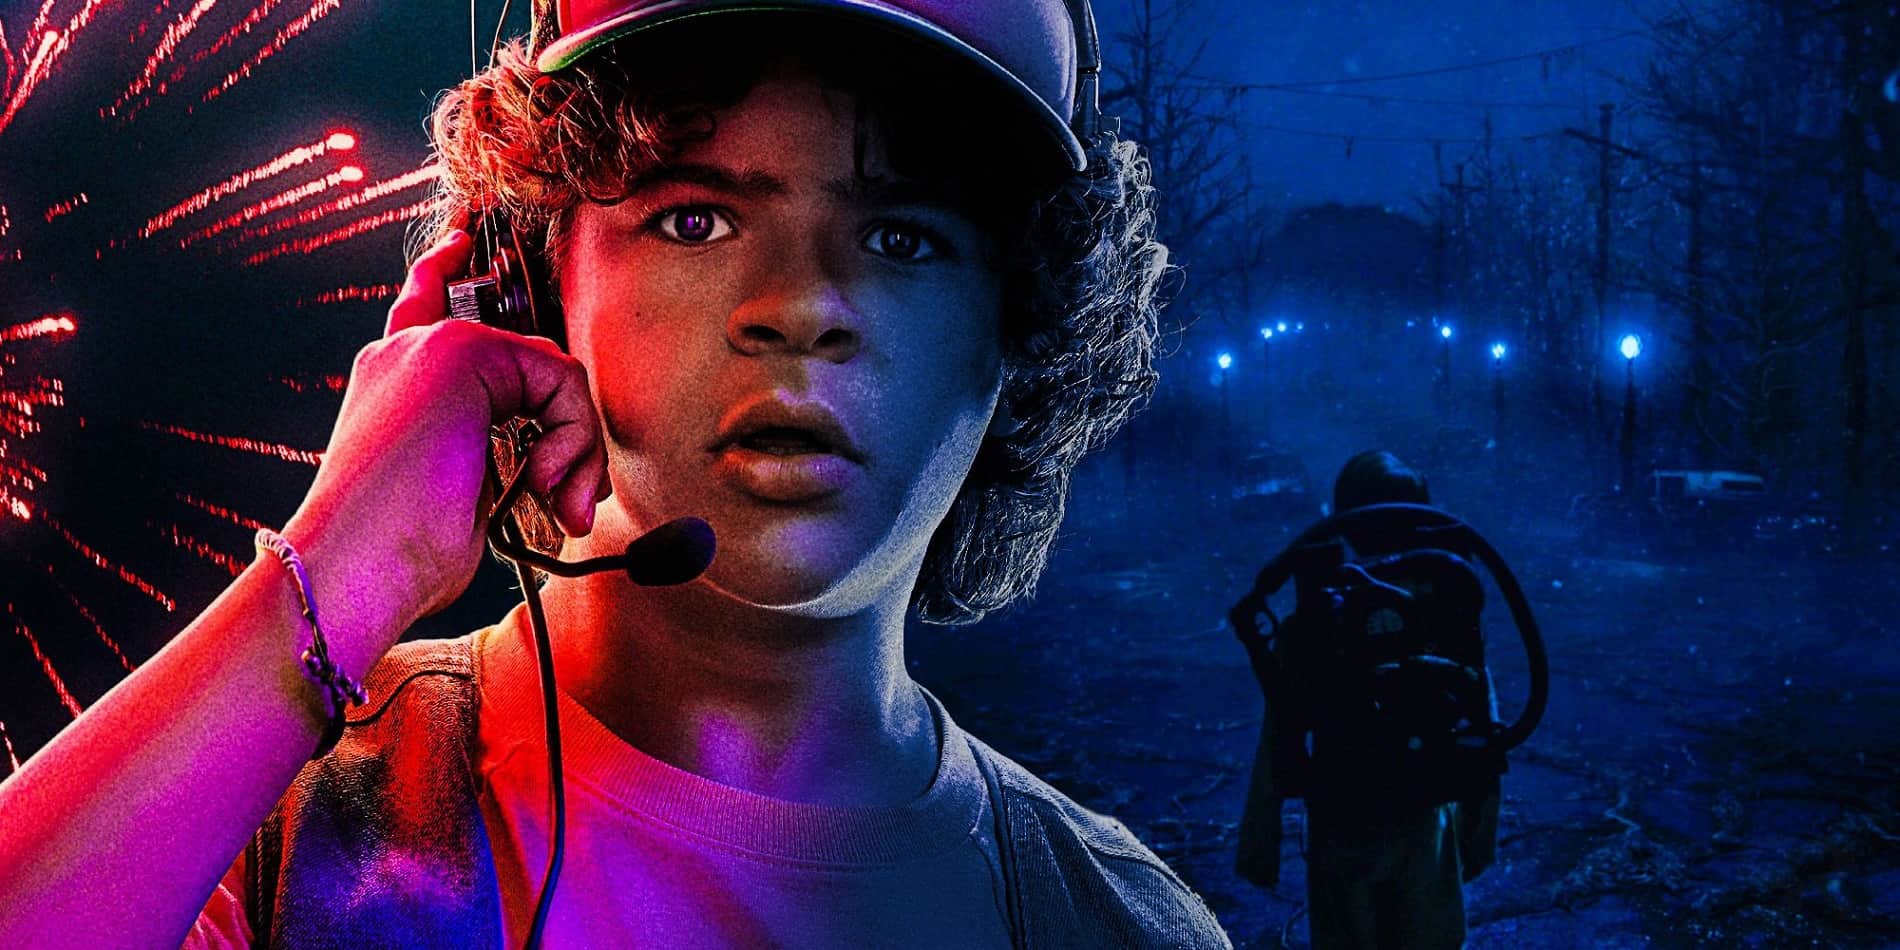 Stranger Things Season 4: Release Date, Cast, Plot And Production Details?